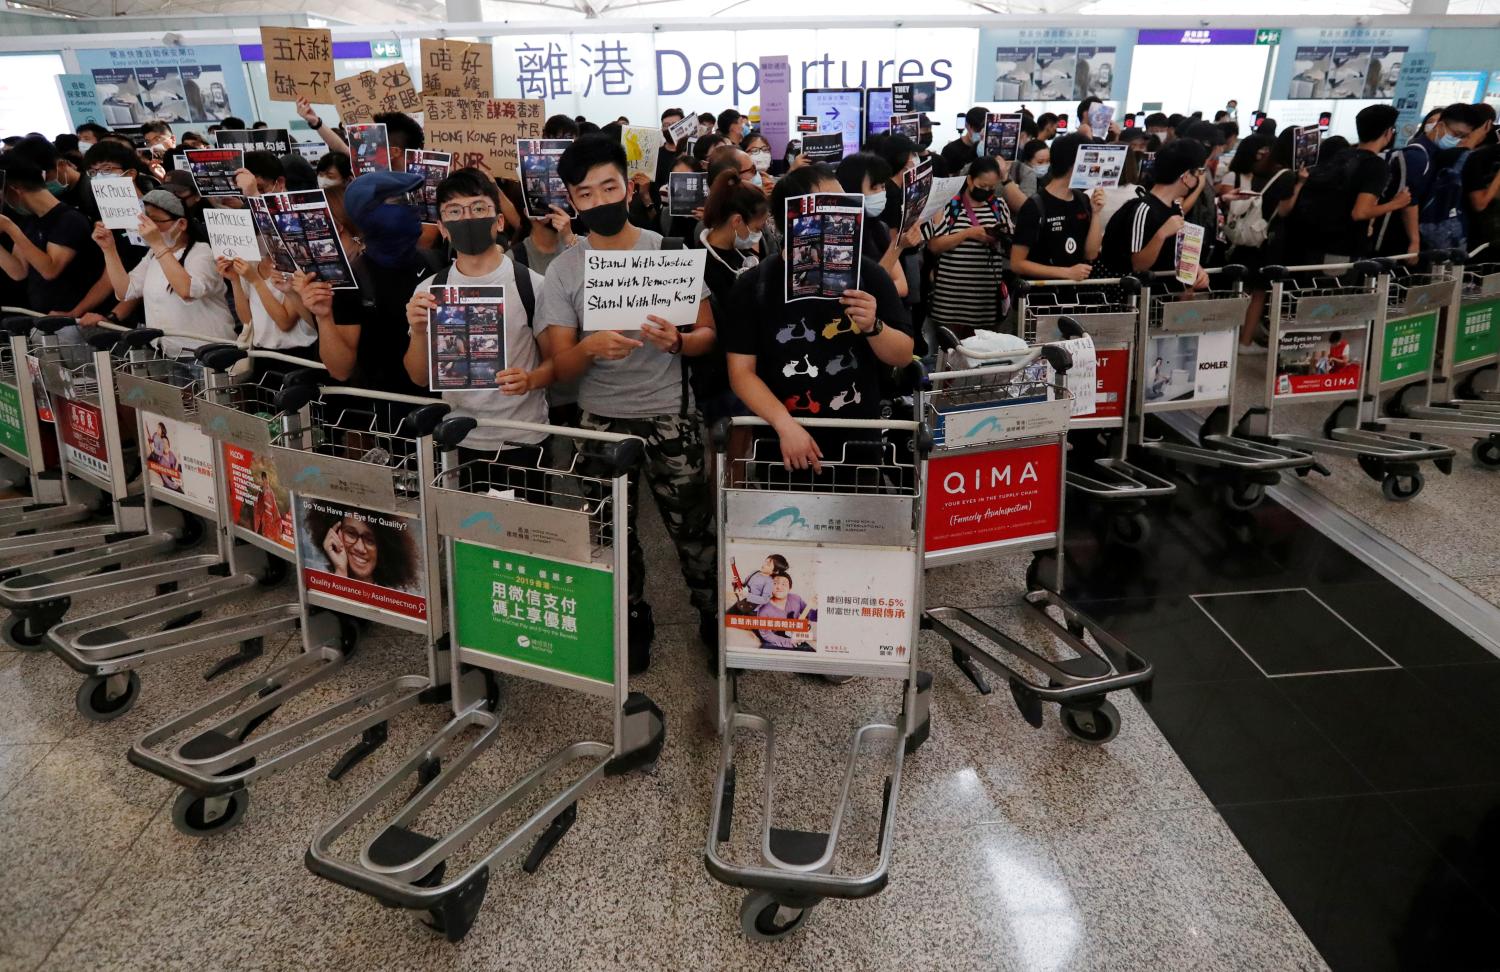 Anti-government protesters stand at a barricade made of trolleys during a demonstration at Hong Kong Airport, China August 13, 2019. REUTERS/Issei Kato - RC1DF4546CB0